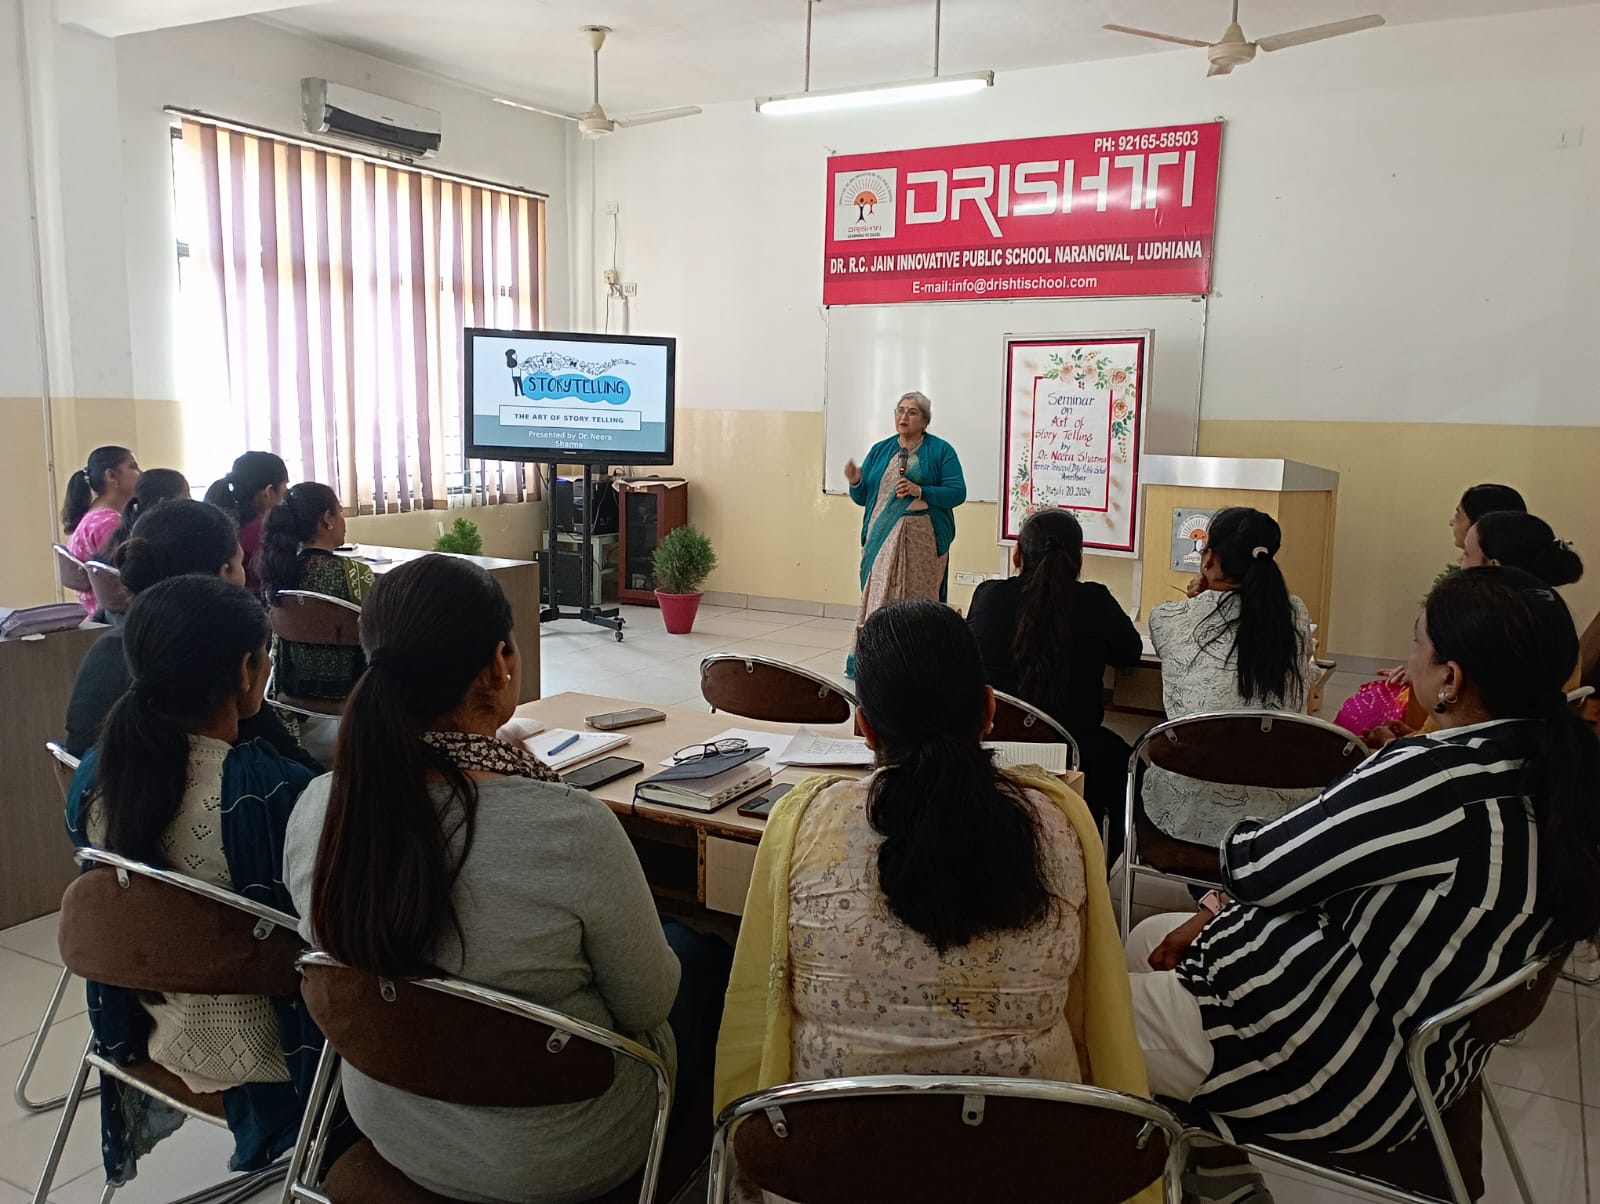 Drishti School conducted a workshop on an “Art of Storytelling” for the teachers